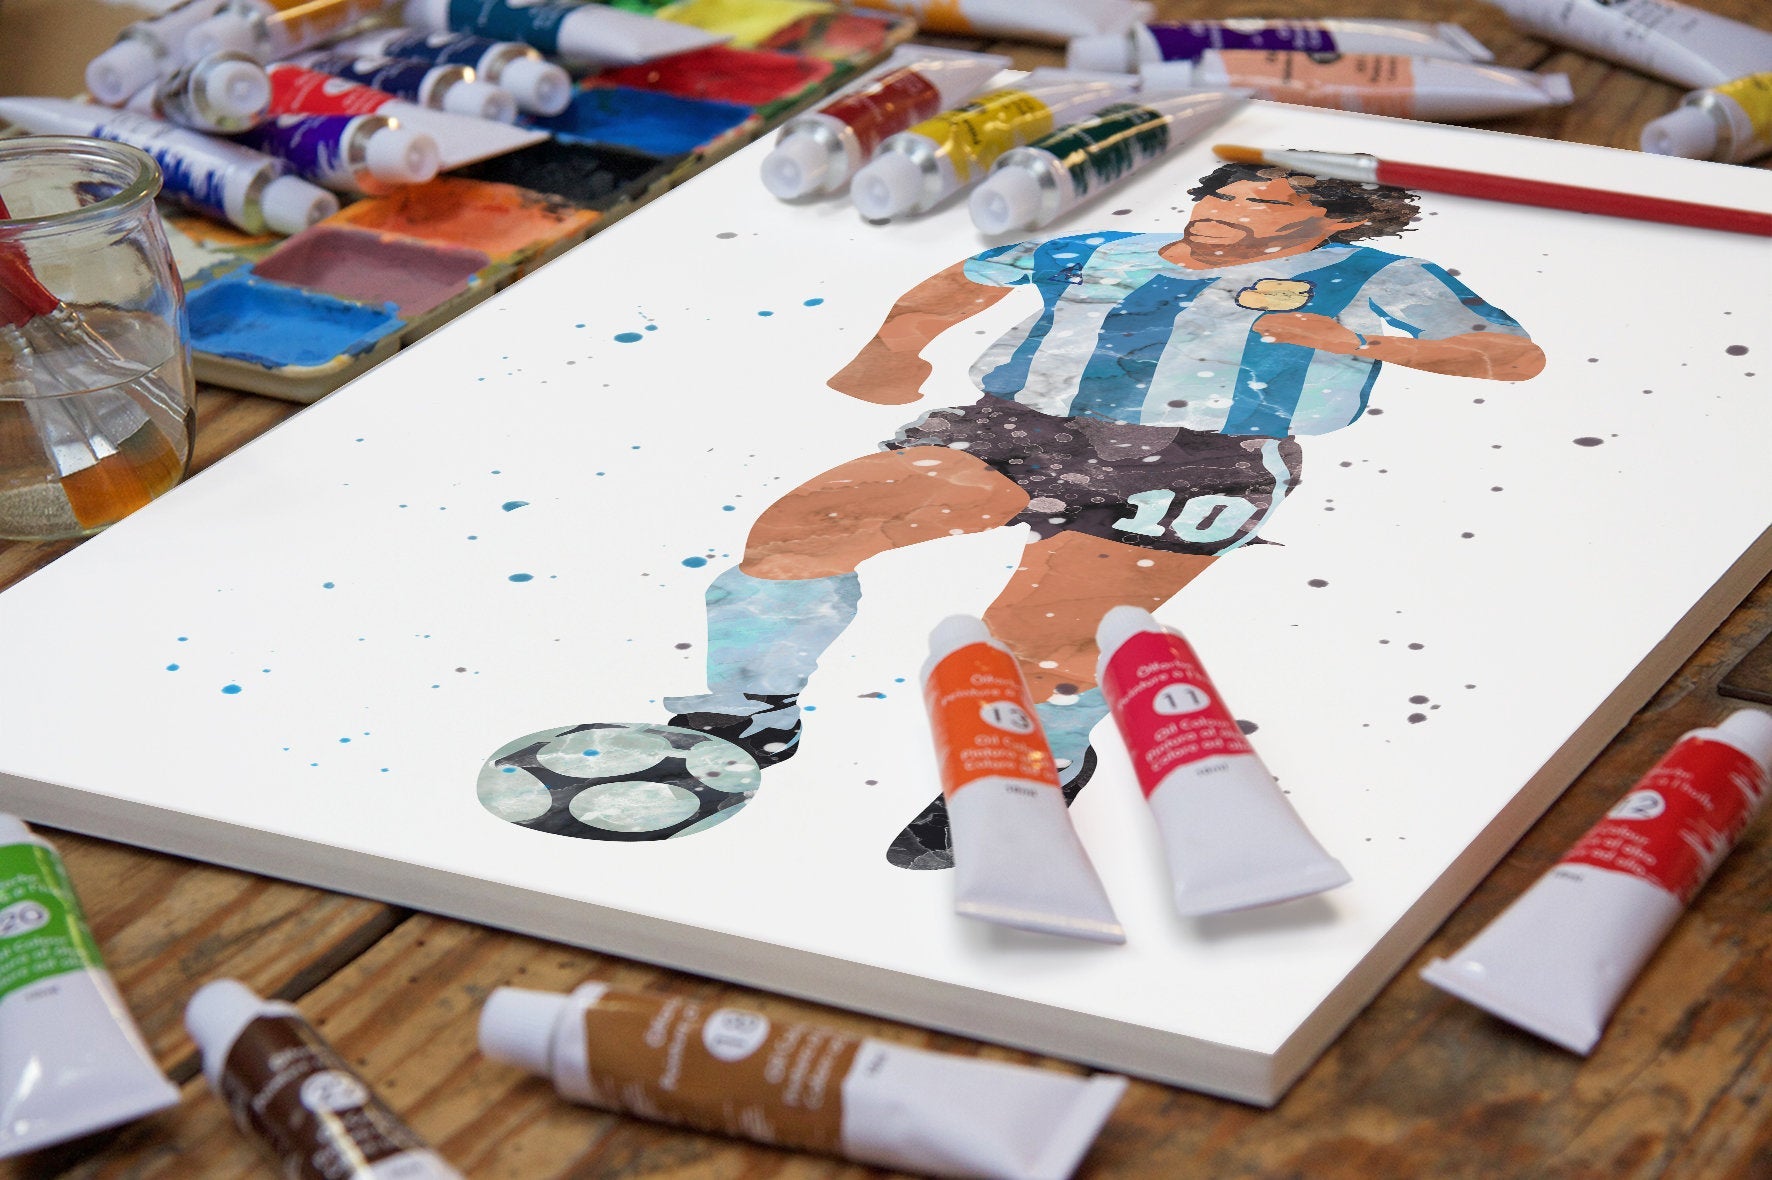 Diego #10 Minimalist Watercolor Art Print Poster Gift Idea For Him Or Her | Football | Soccer